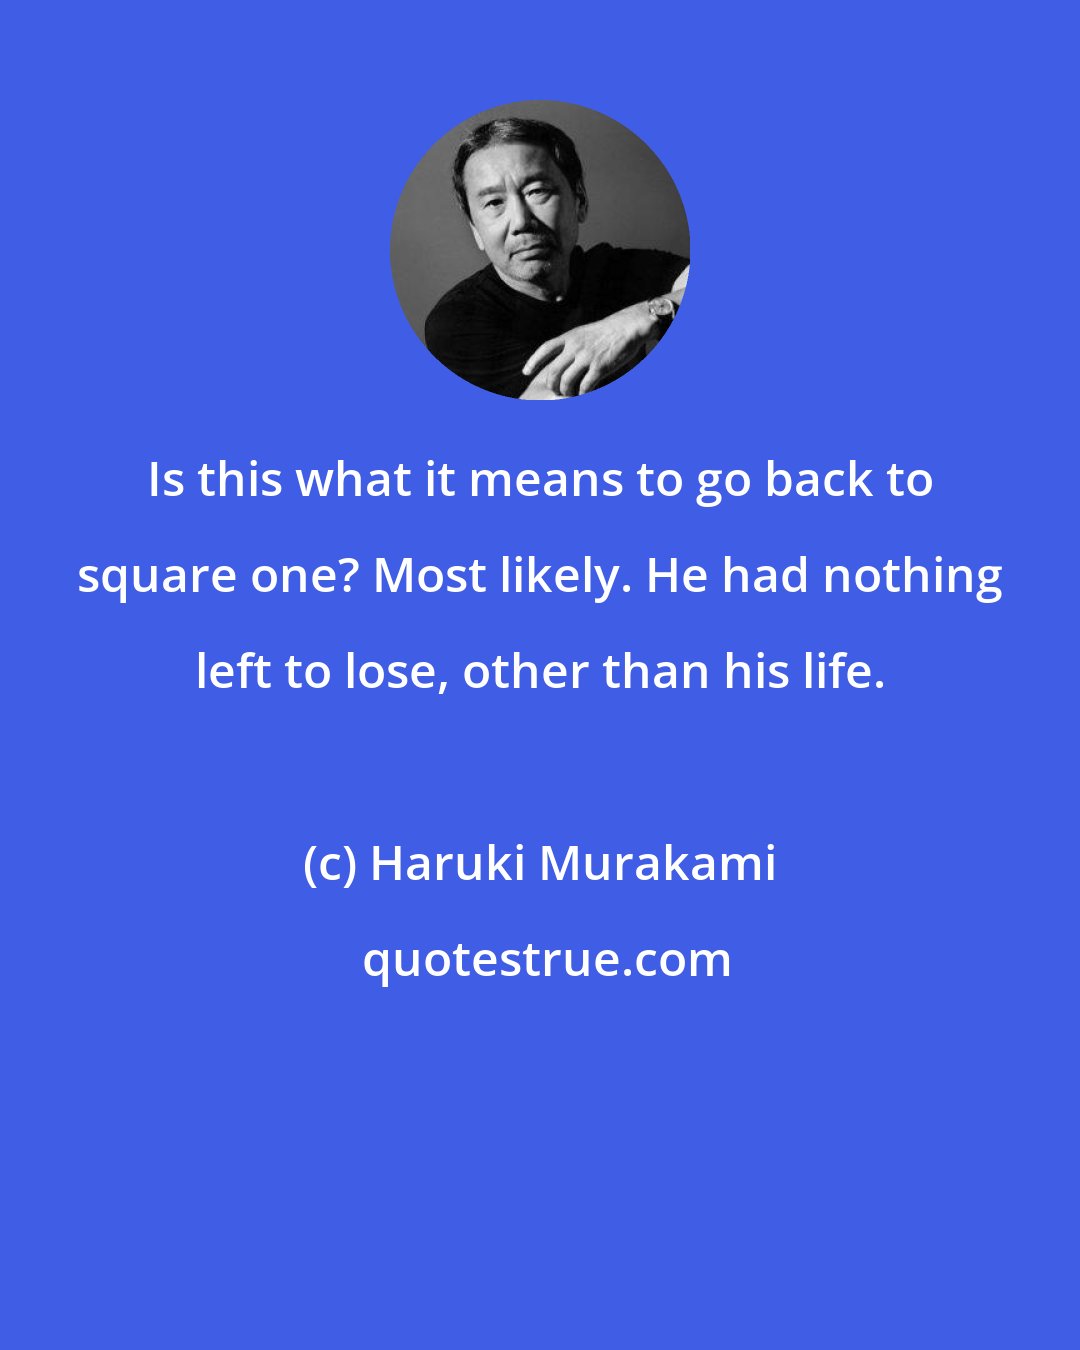 Haruki Murakami: Is this what it means to go back to square one? Most likely. He had nothing left to lose, other than his life.